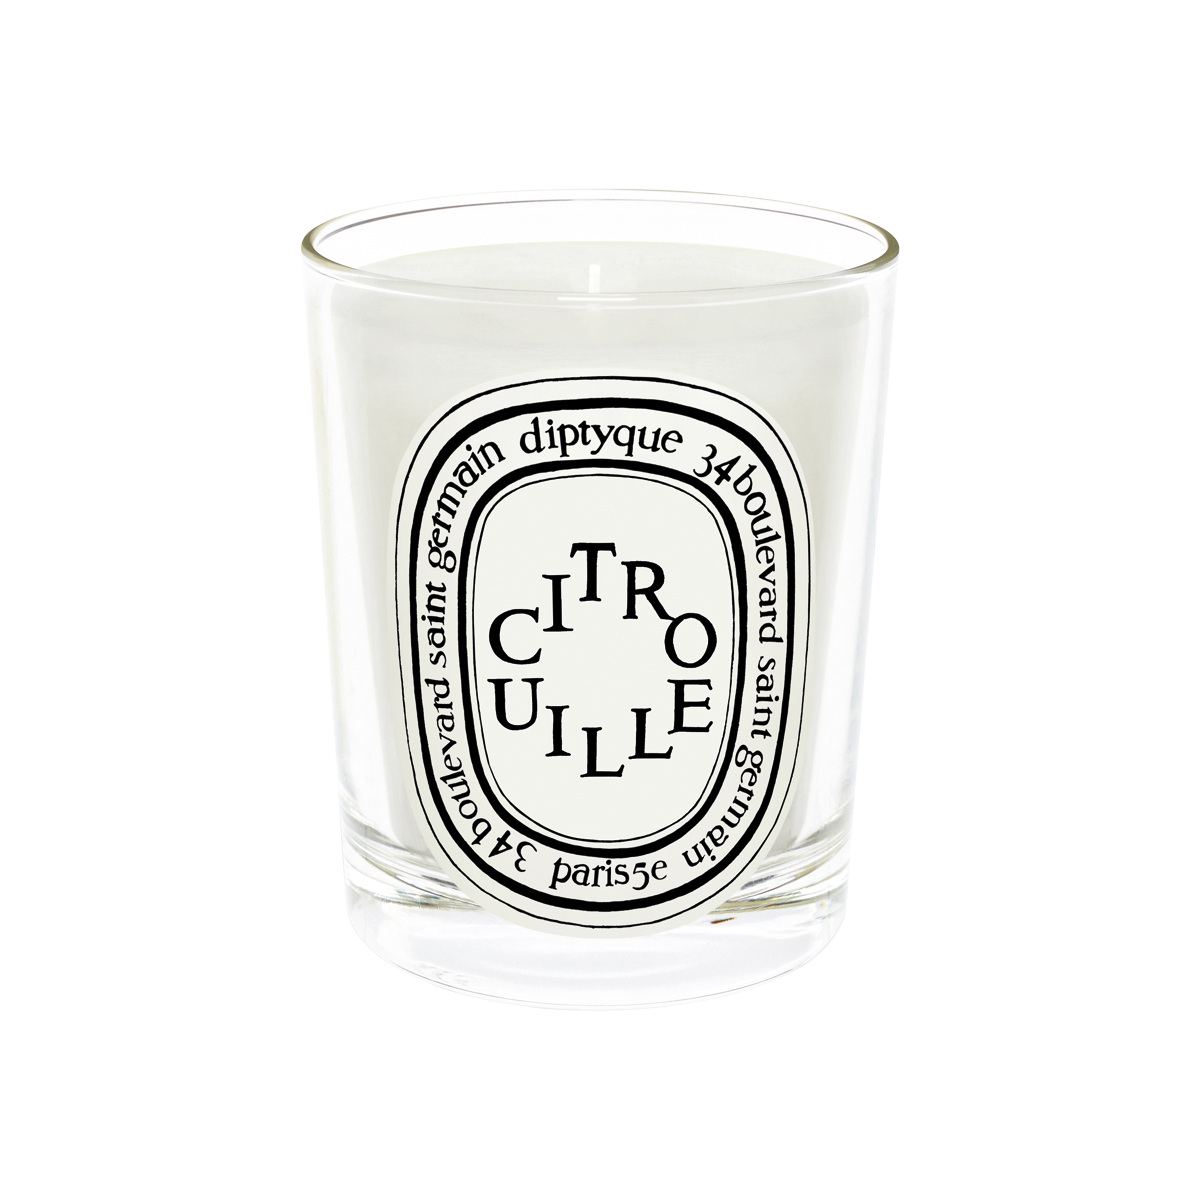 Diptyque - Citrouille Scented Candle